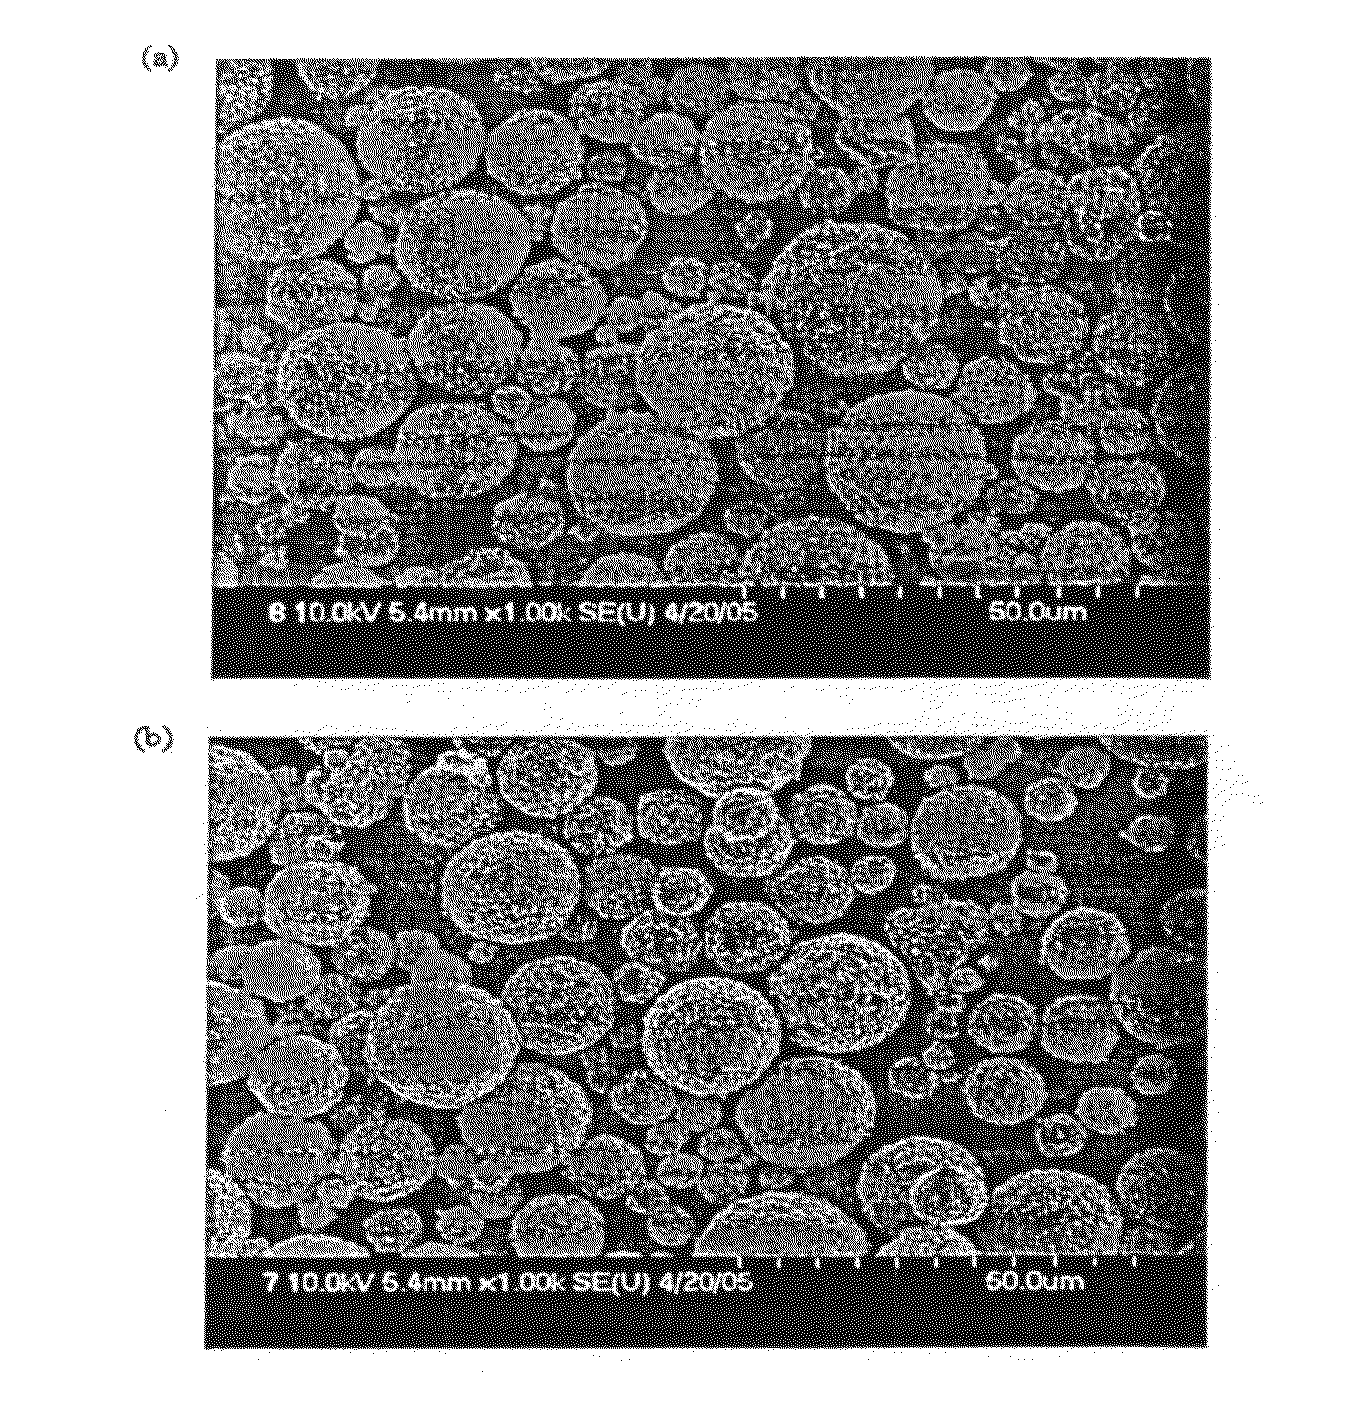 Lithium-Metal Composite Oxides and Electrochemical Device Using the Same